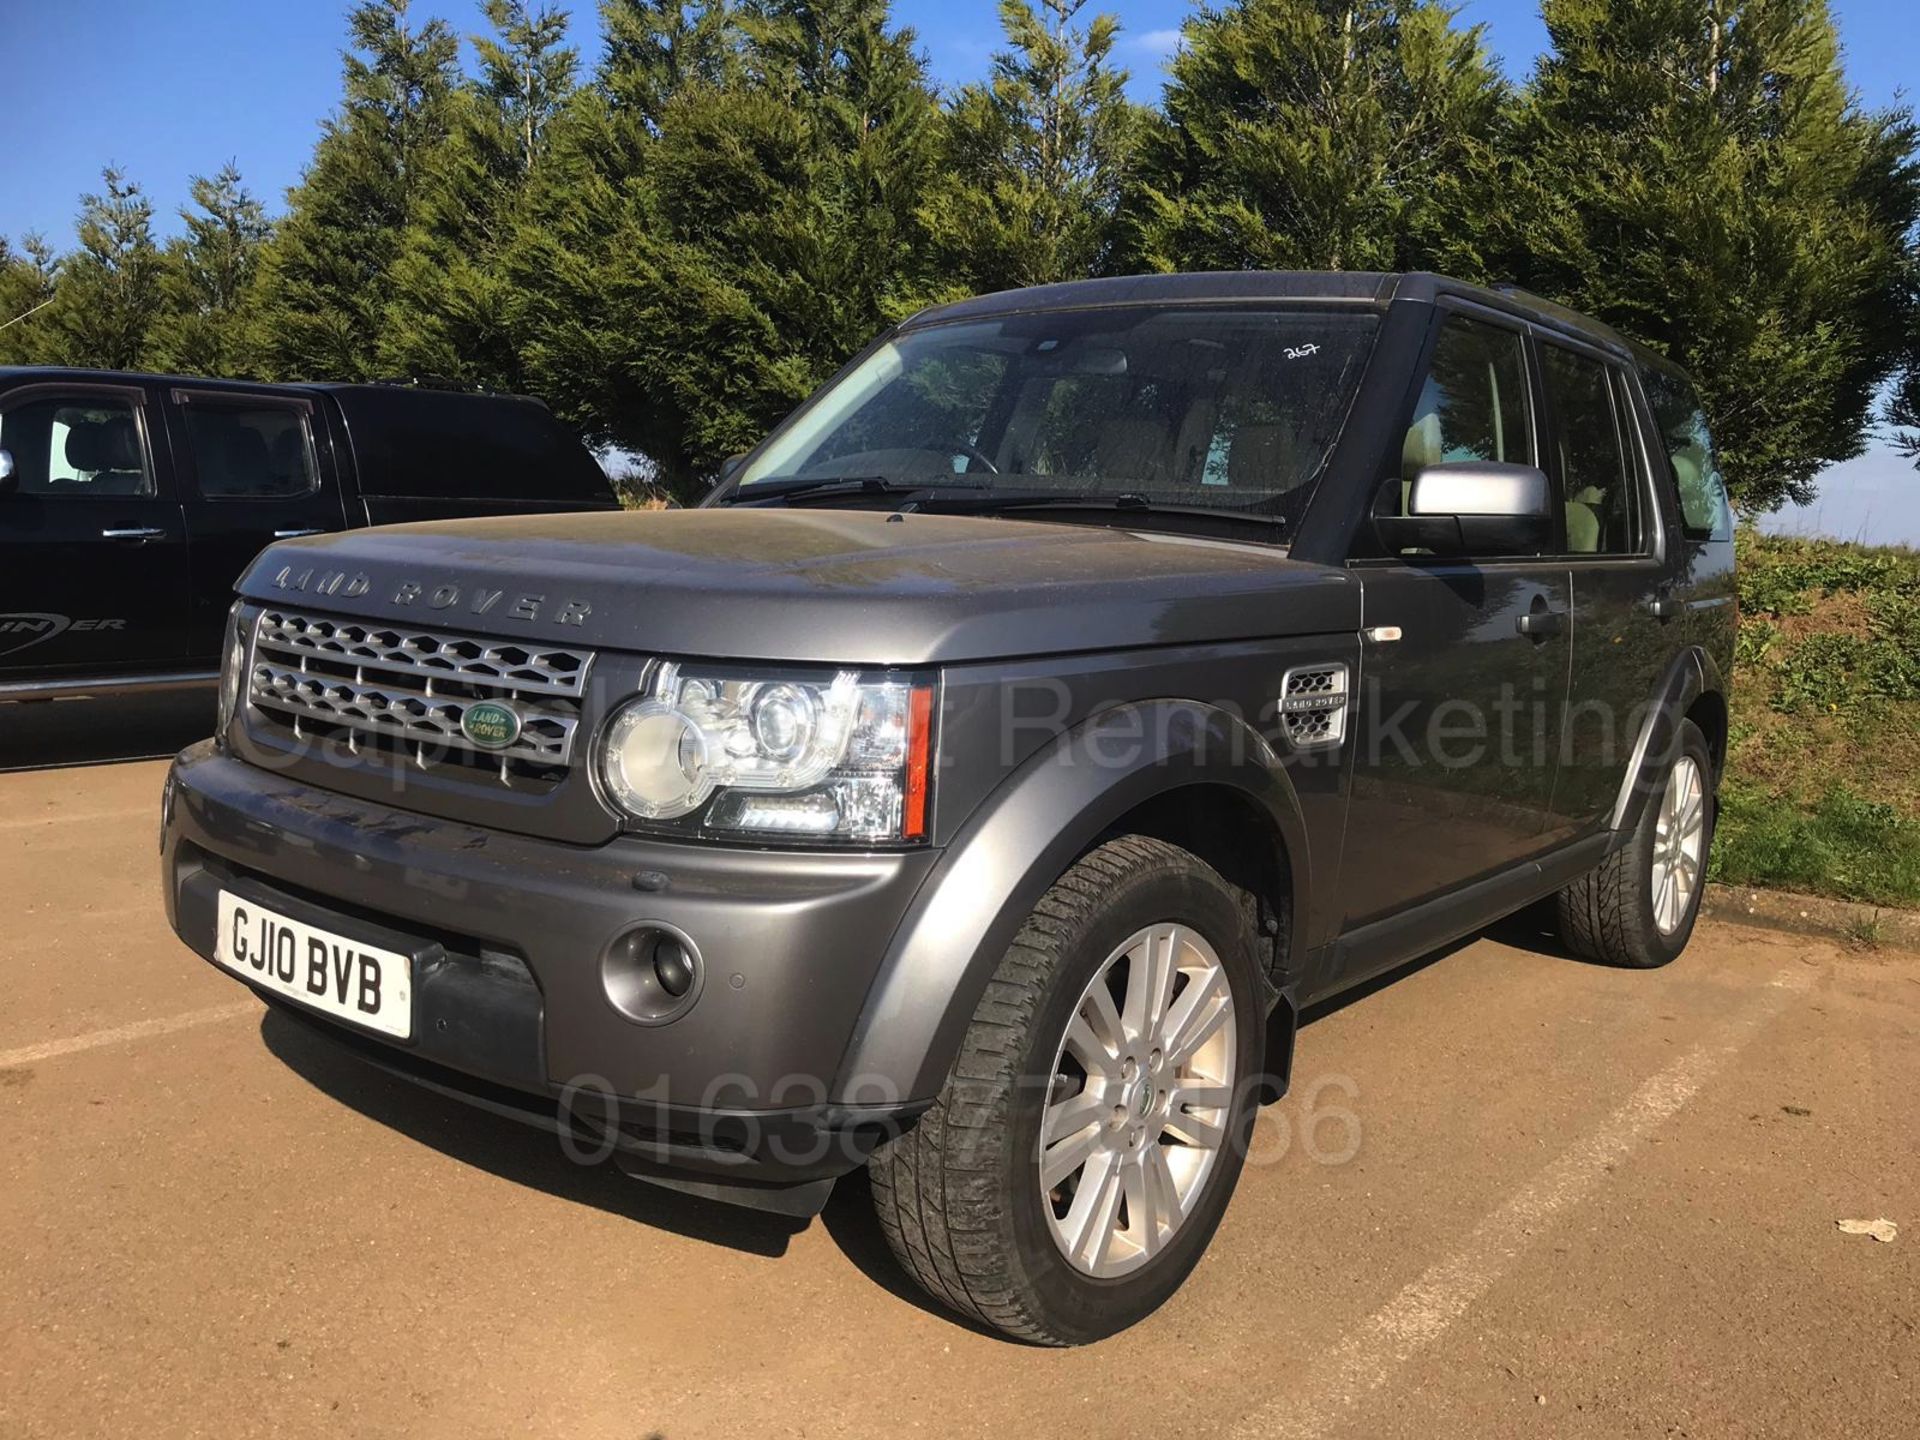 (ON SALE) LAND ROVER DISCOVERY 4 *HSE* SUV (2010) '3.0 TDV6 - 245 BHP - AUTO' *LEATHER - SAT NAV* - Image 4 of 24